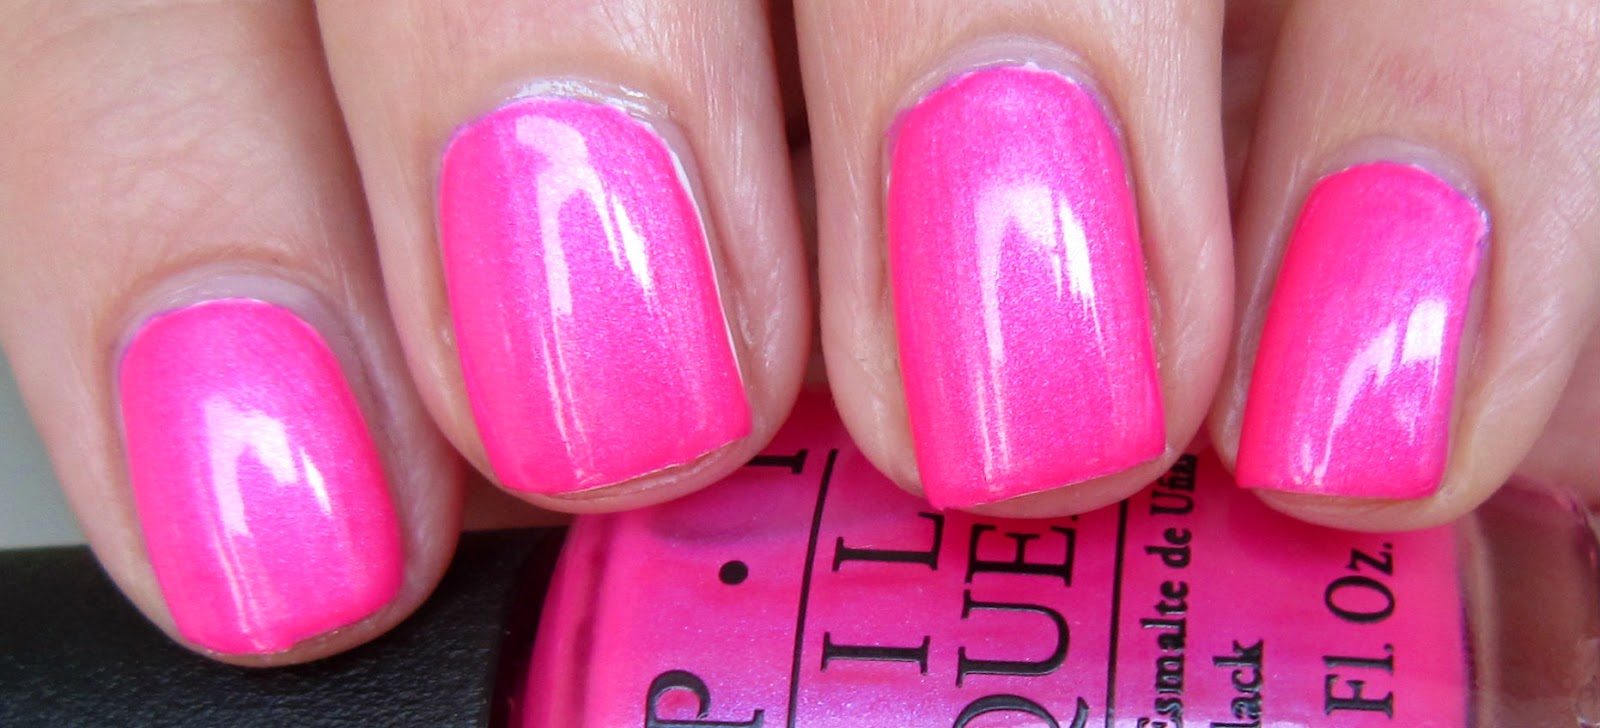 OPI Nail Lacquer in "Hotter Than You Pink" - wide 6